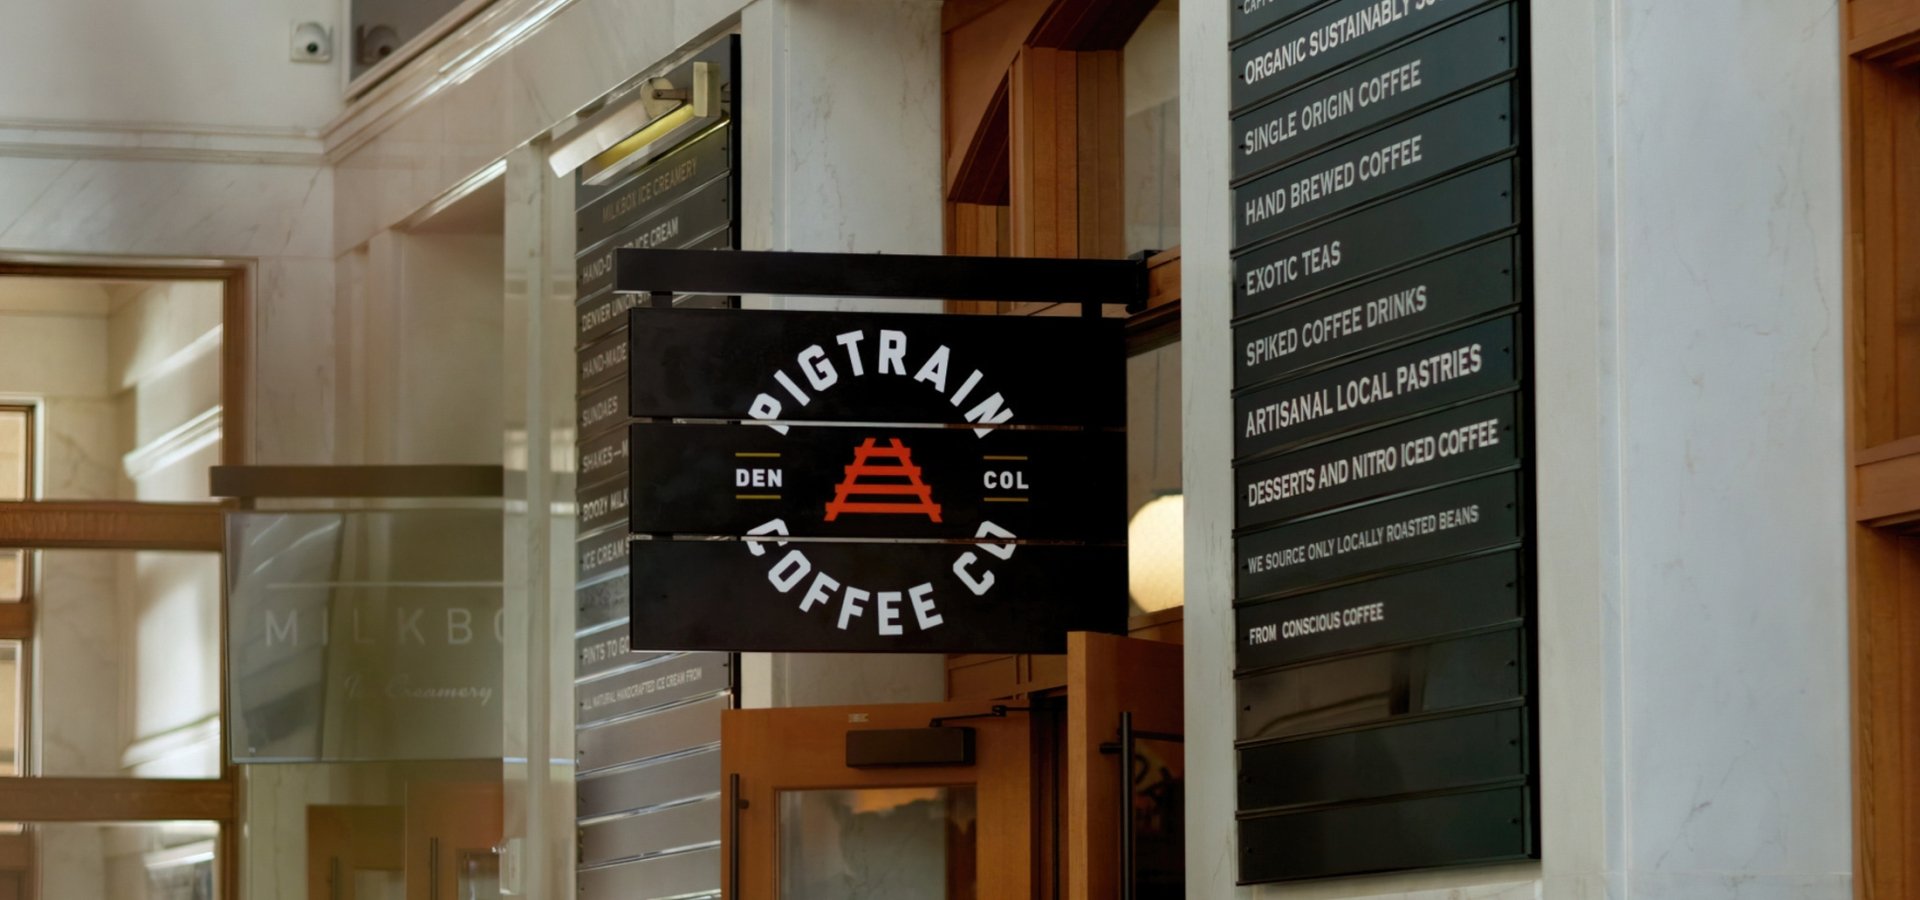 Pigtrain coffee co sign